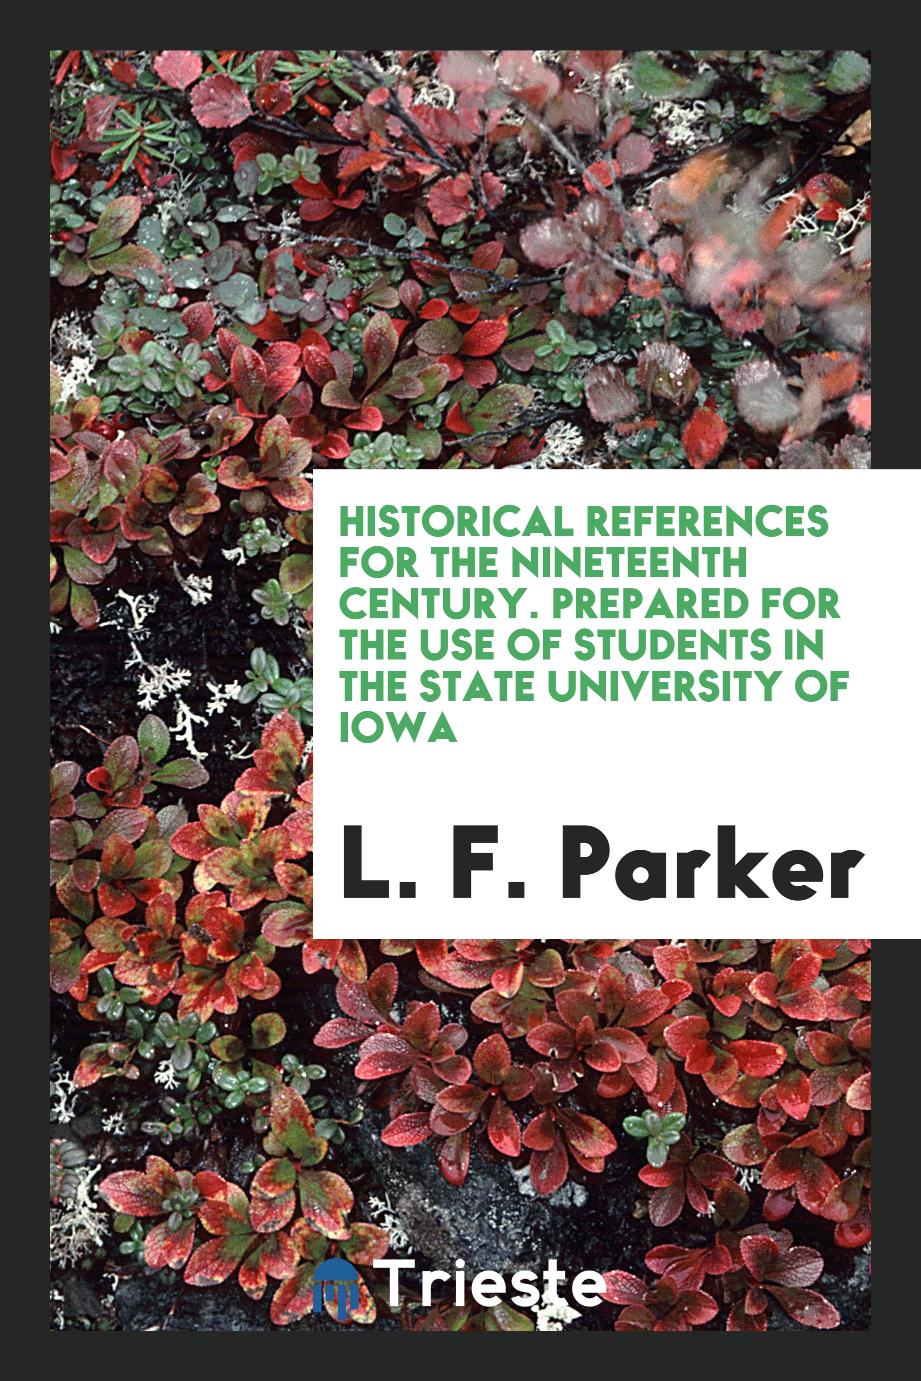 Historical references for the nineteenth century. Prepared for the use of students in the State university of Iowa